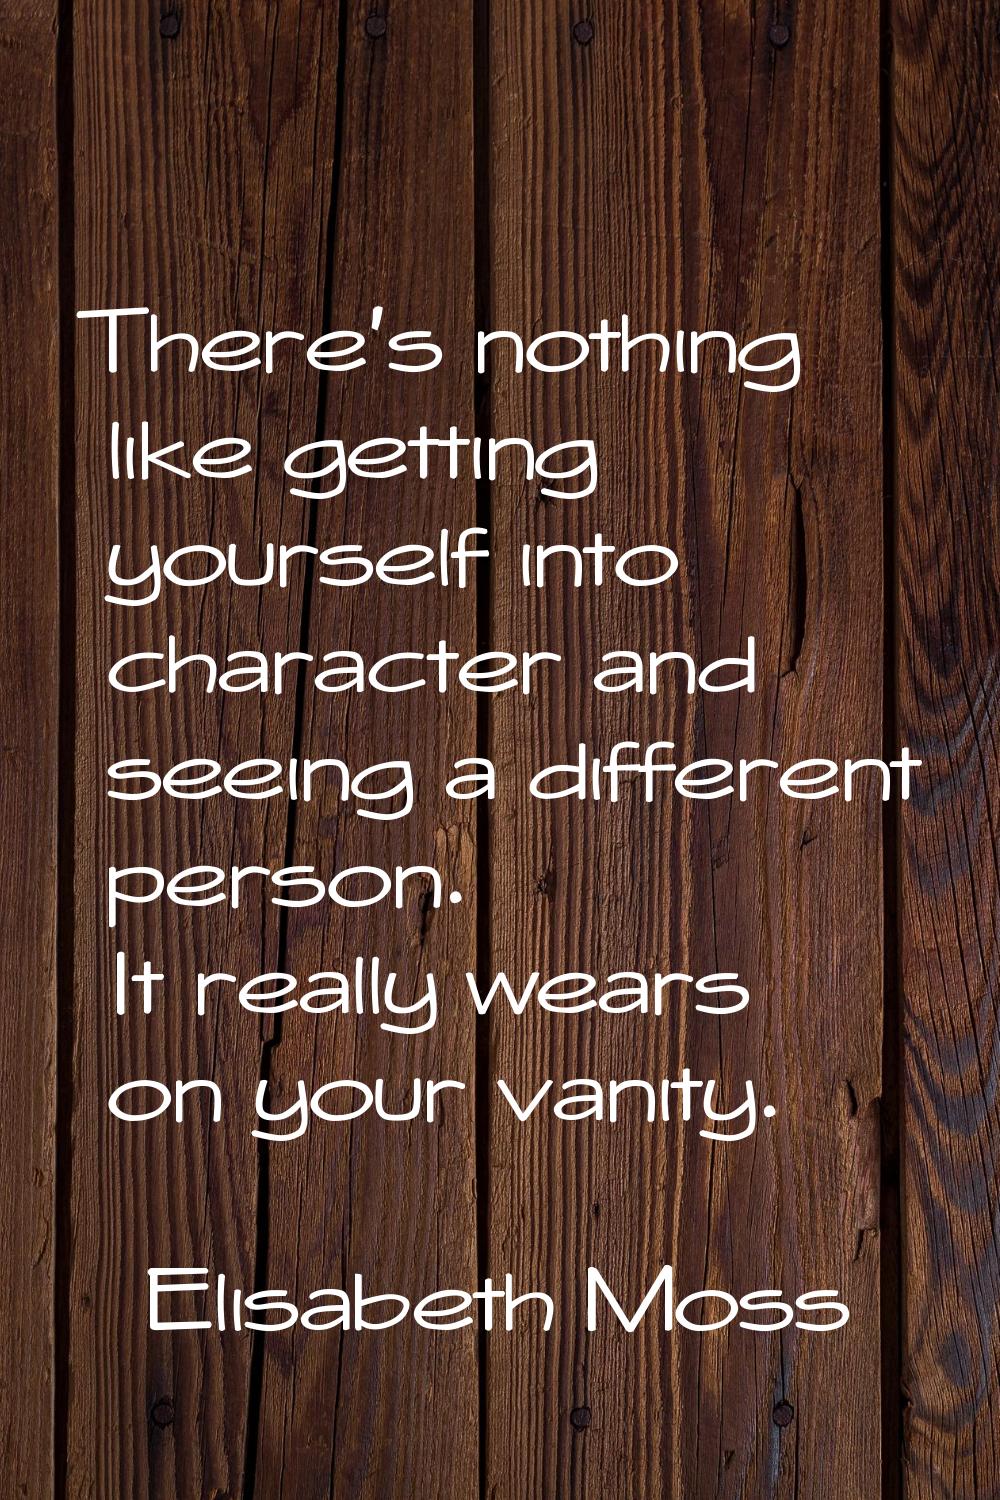 There's nothing like getting yourself into character and seeing a different person. It really wears